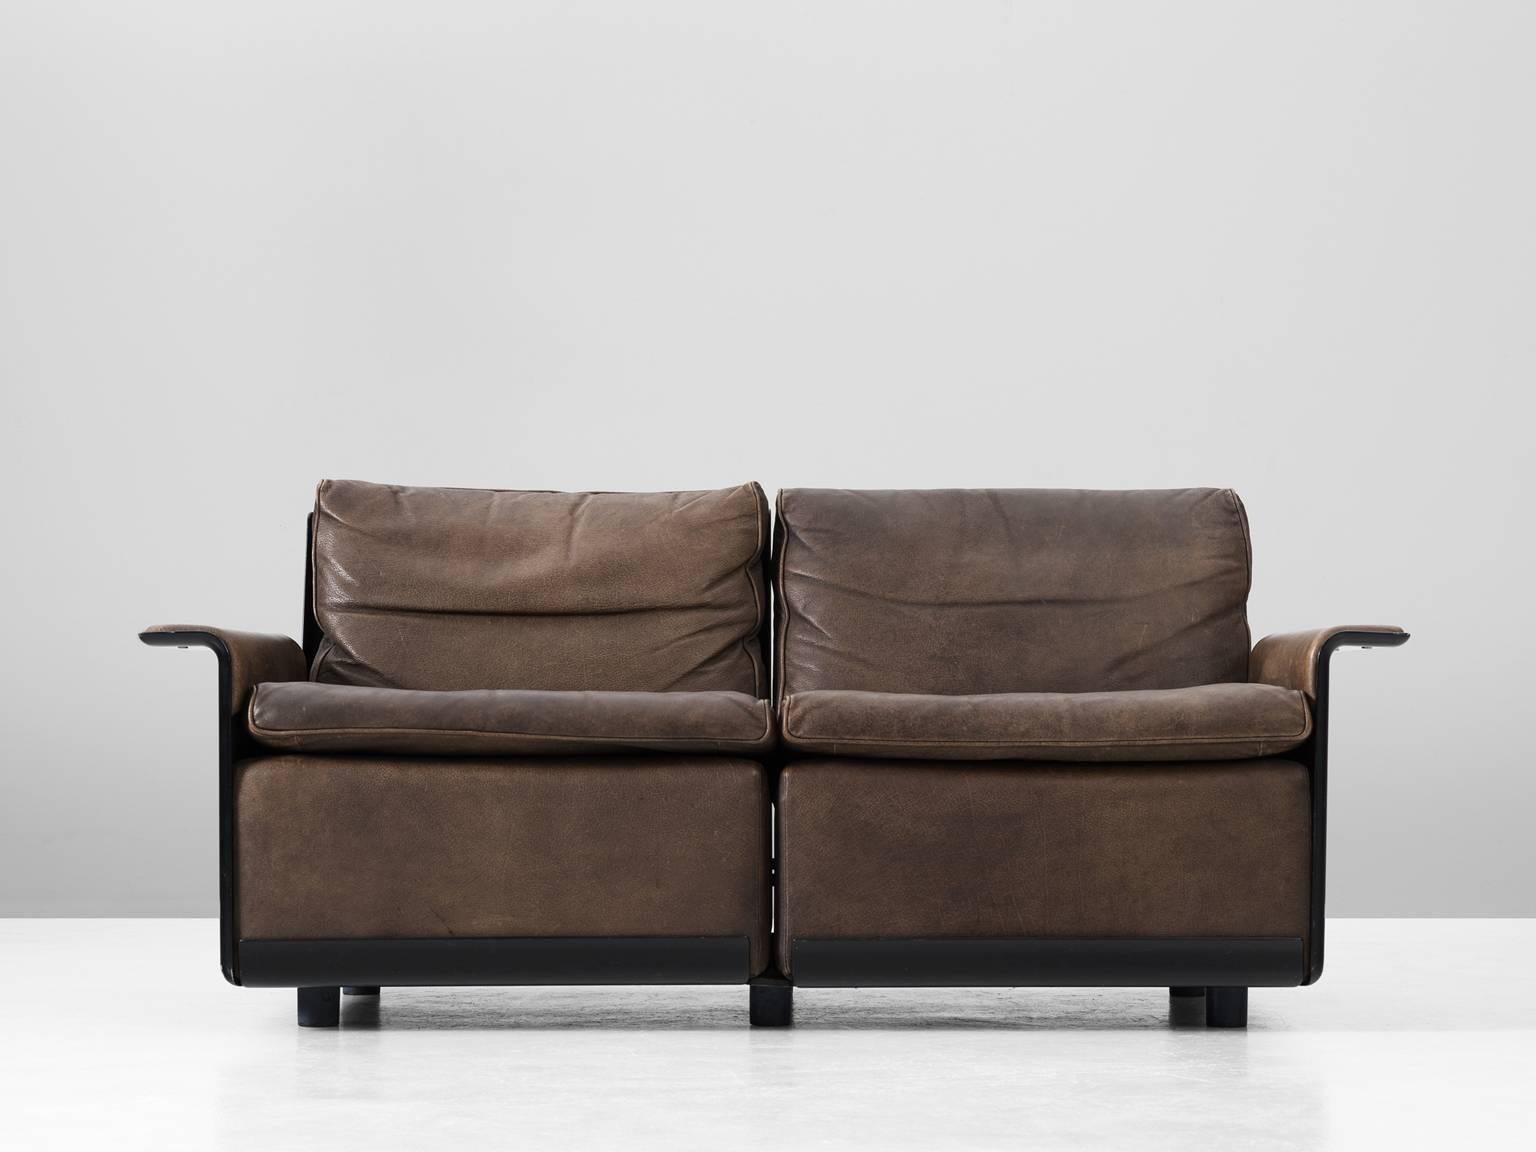 Sofa model RZ620, in leather and hot-pressed sheet-moulding compound, by Dieter Rams for Vitsoe and Zapf, Germany, 1962.

Two-seat sofa in beautiful patinated brown leather. This settee has an interesting design with a sleek and tight outside and